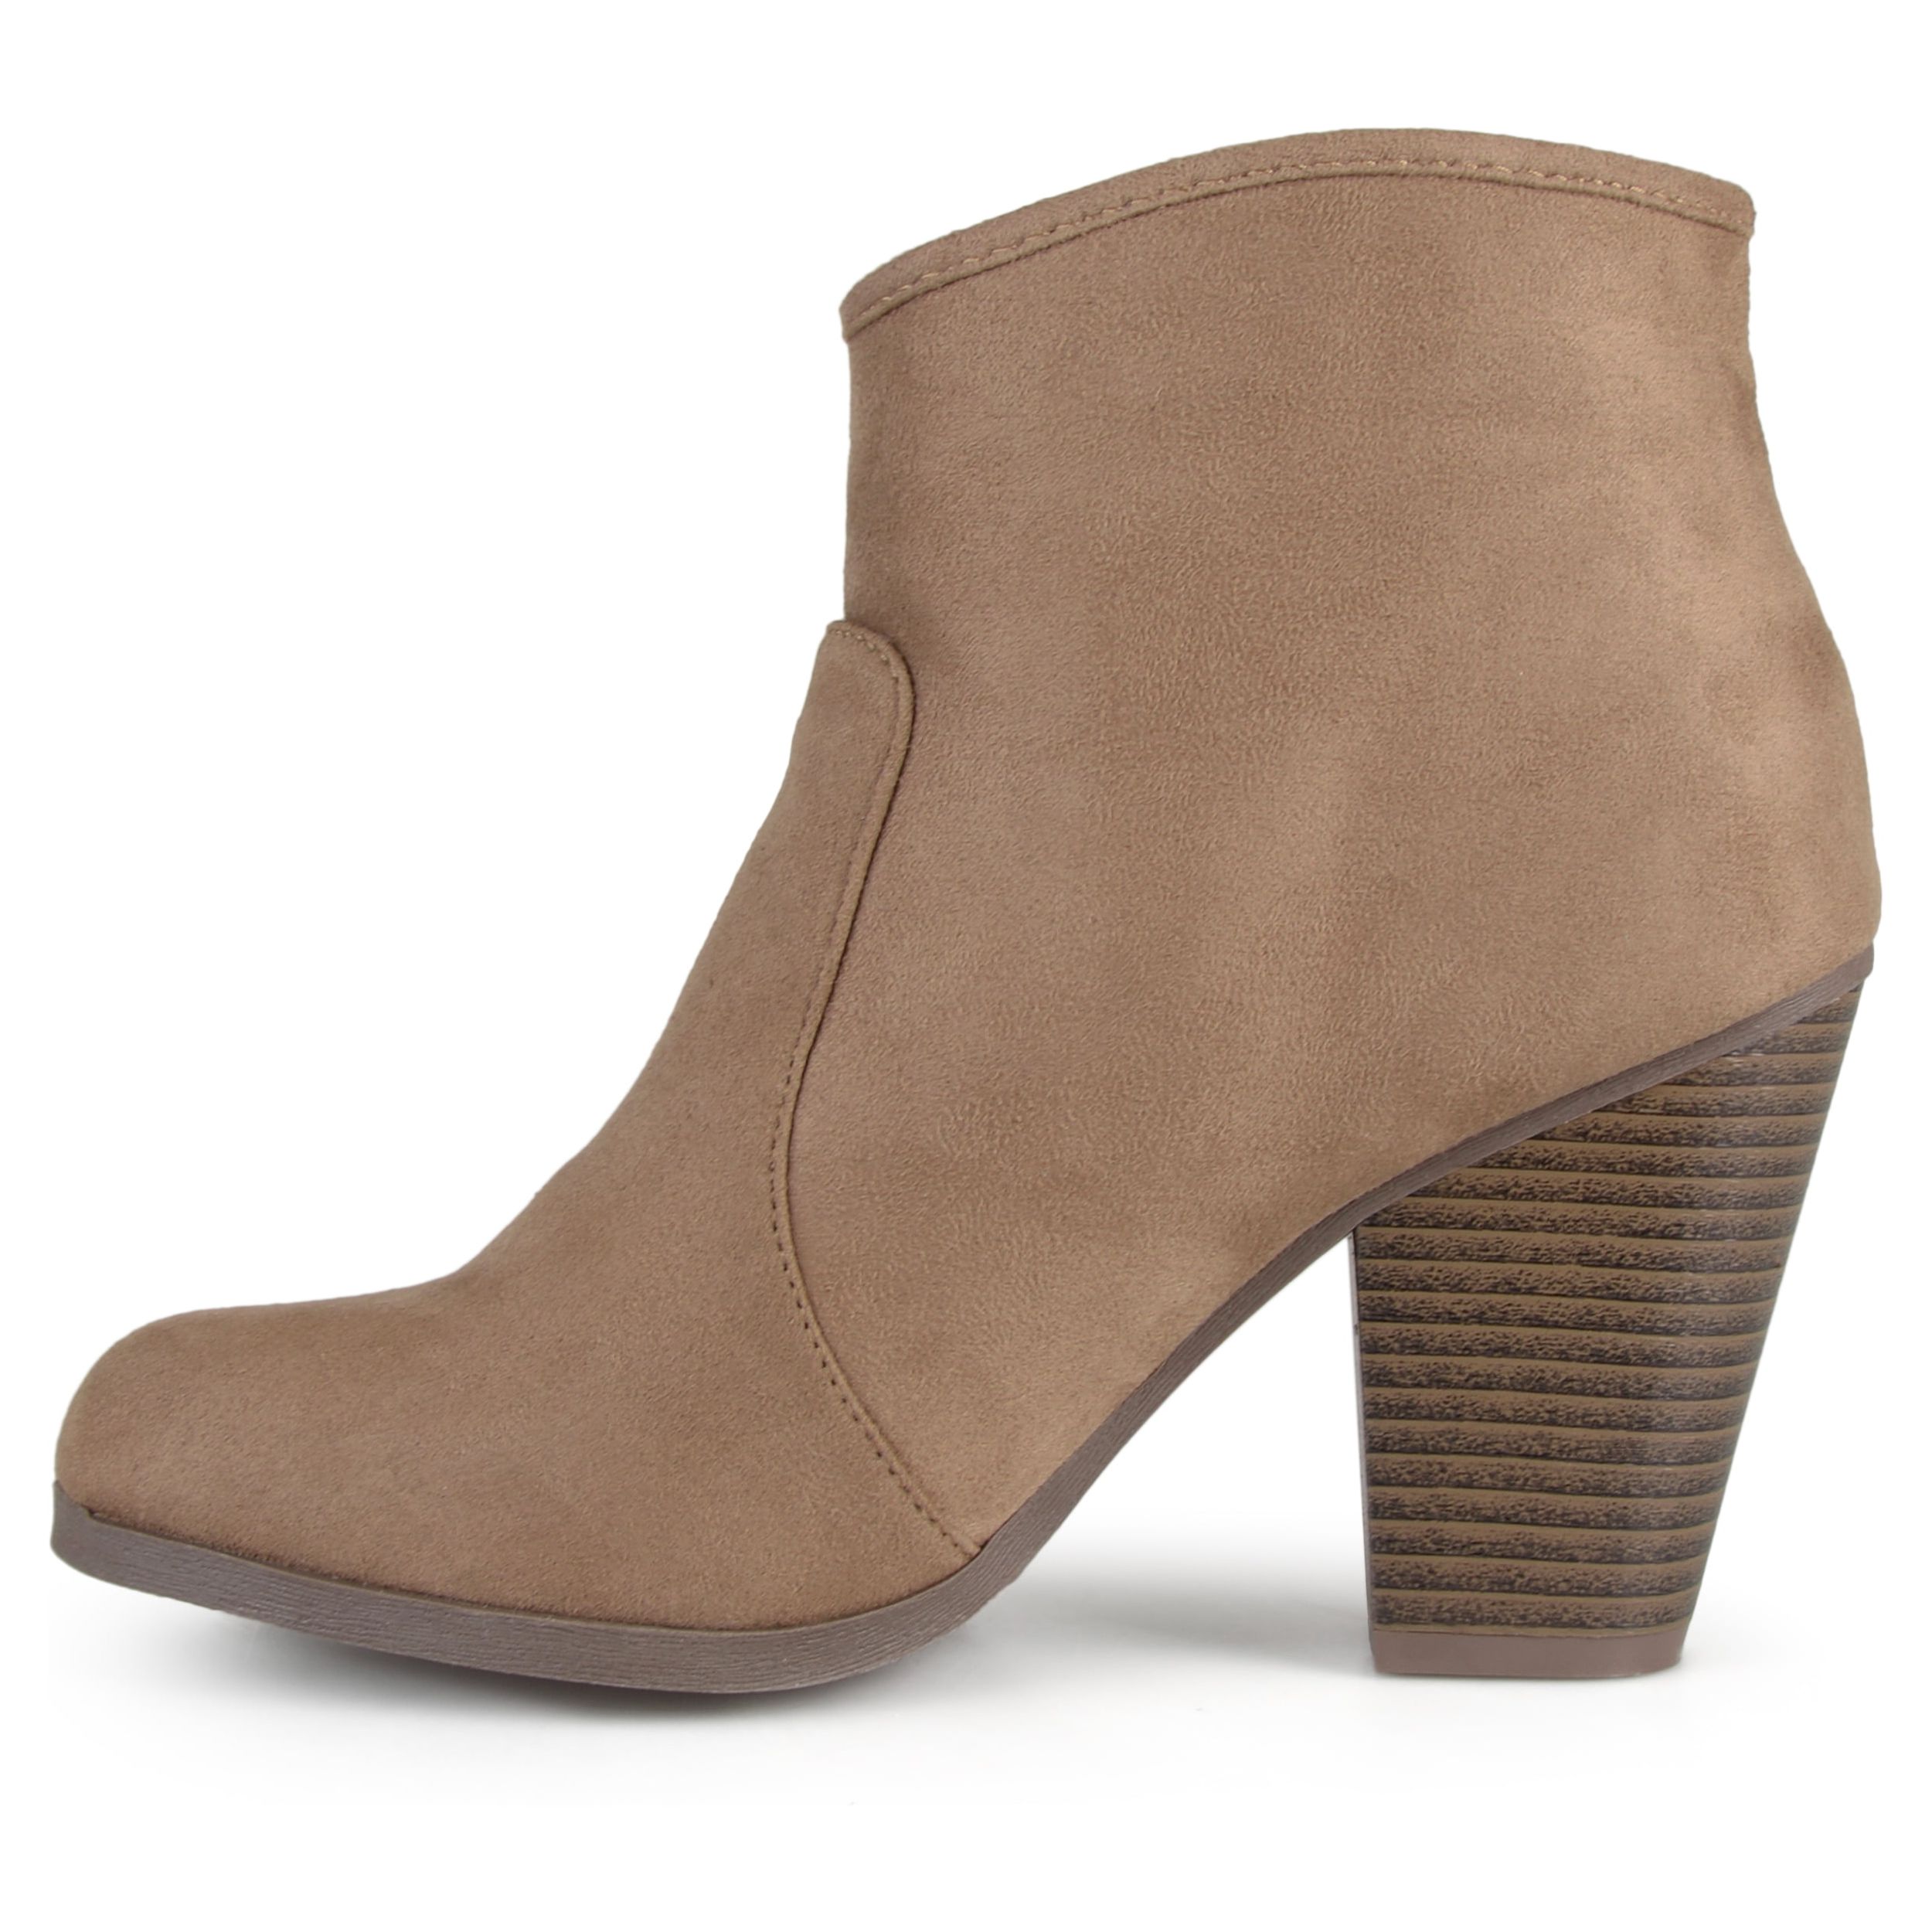 Brinley Co. Women's Wide Width Faux Suede High Heel Ankle Boots - image 5 of 7